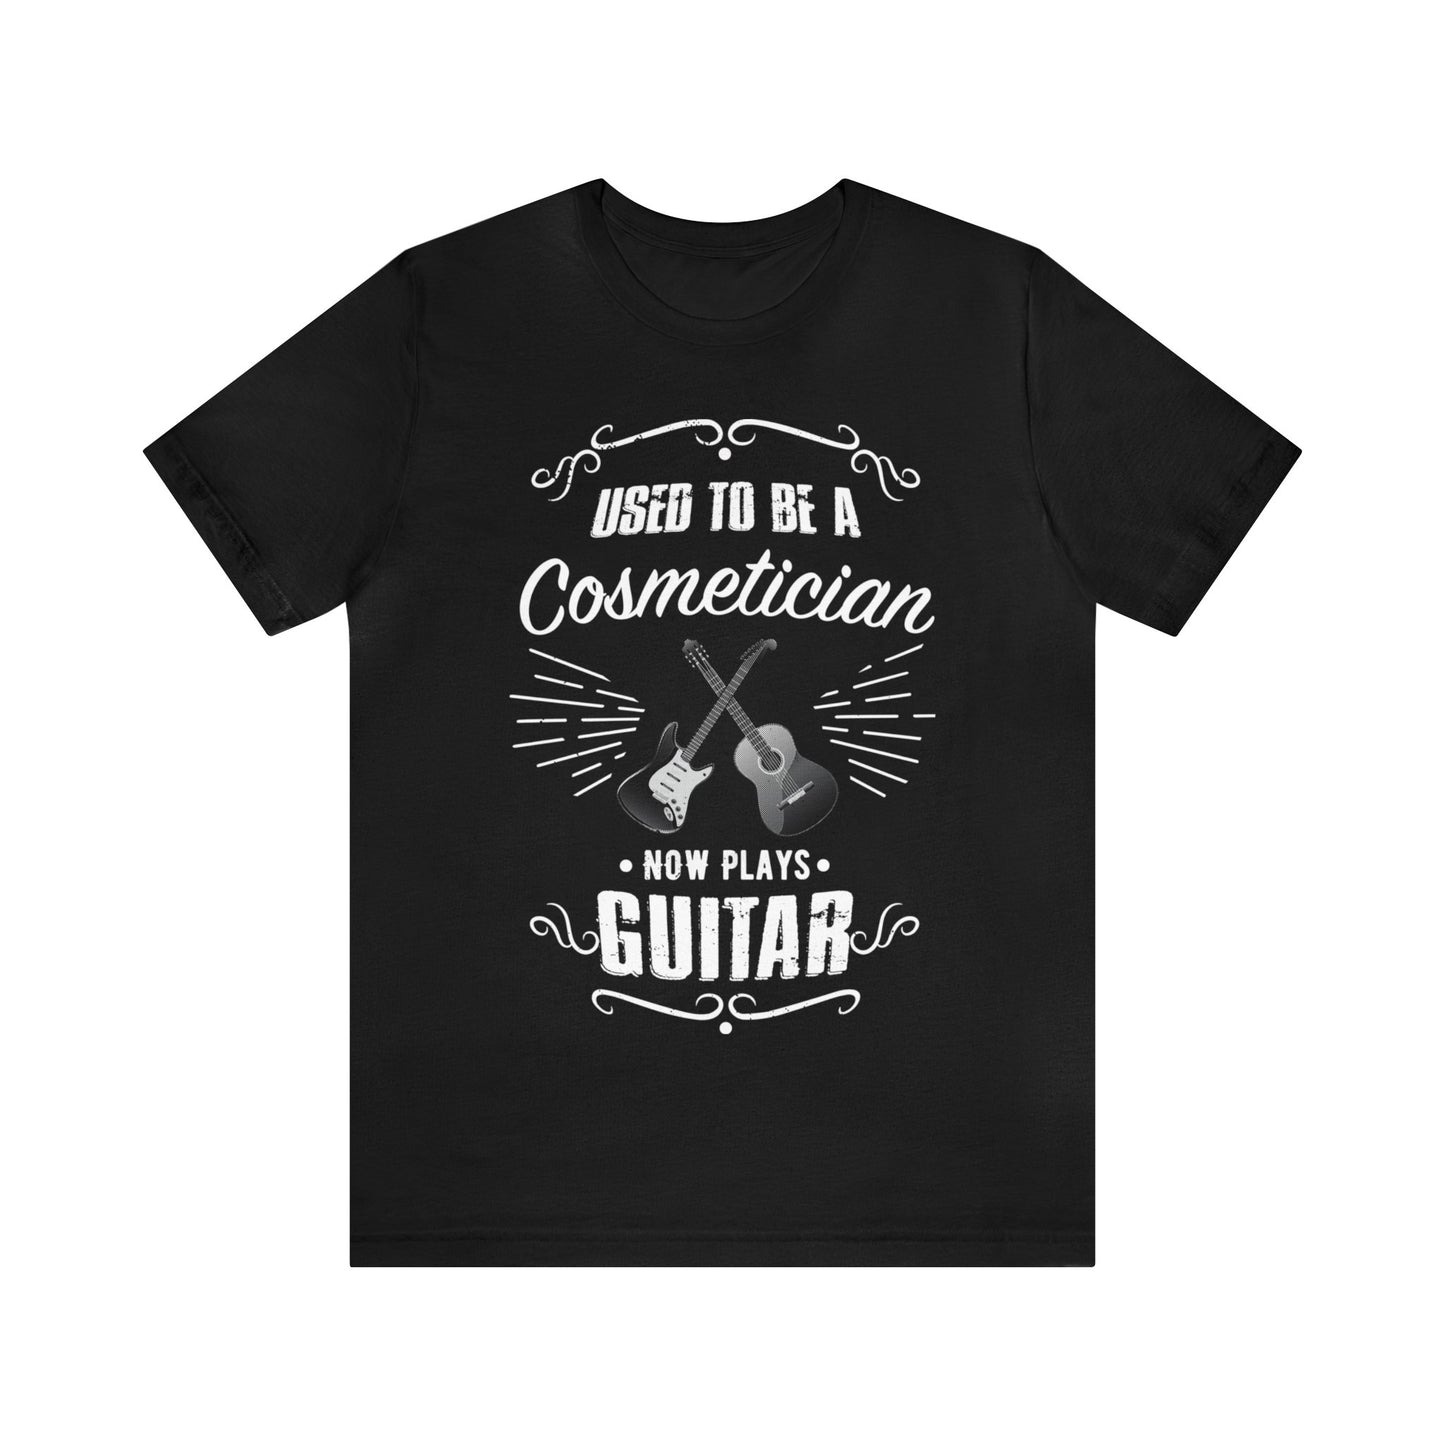 Used to be a COSMETICIAN; Now Plays GUITAR - Funny Retirement Gift, Unisex T-shirt Bella+Canvas 3001, dark shirt colors for amateur musician/guitar player